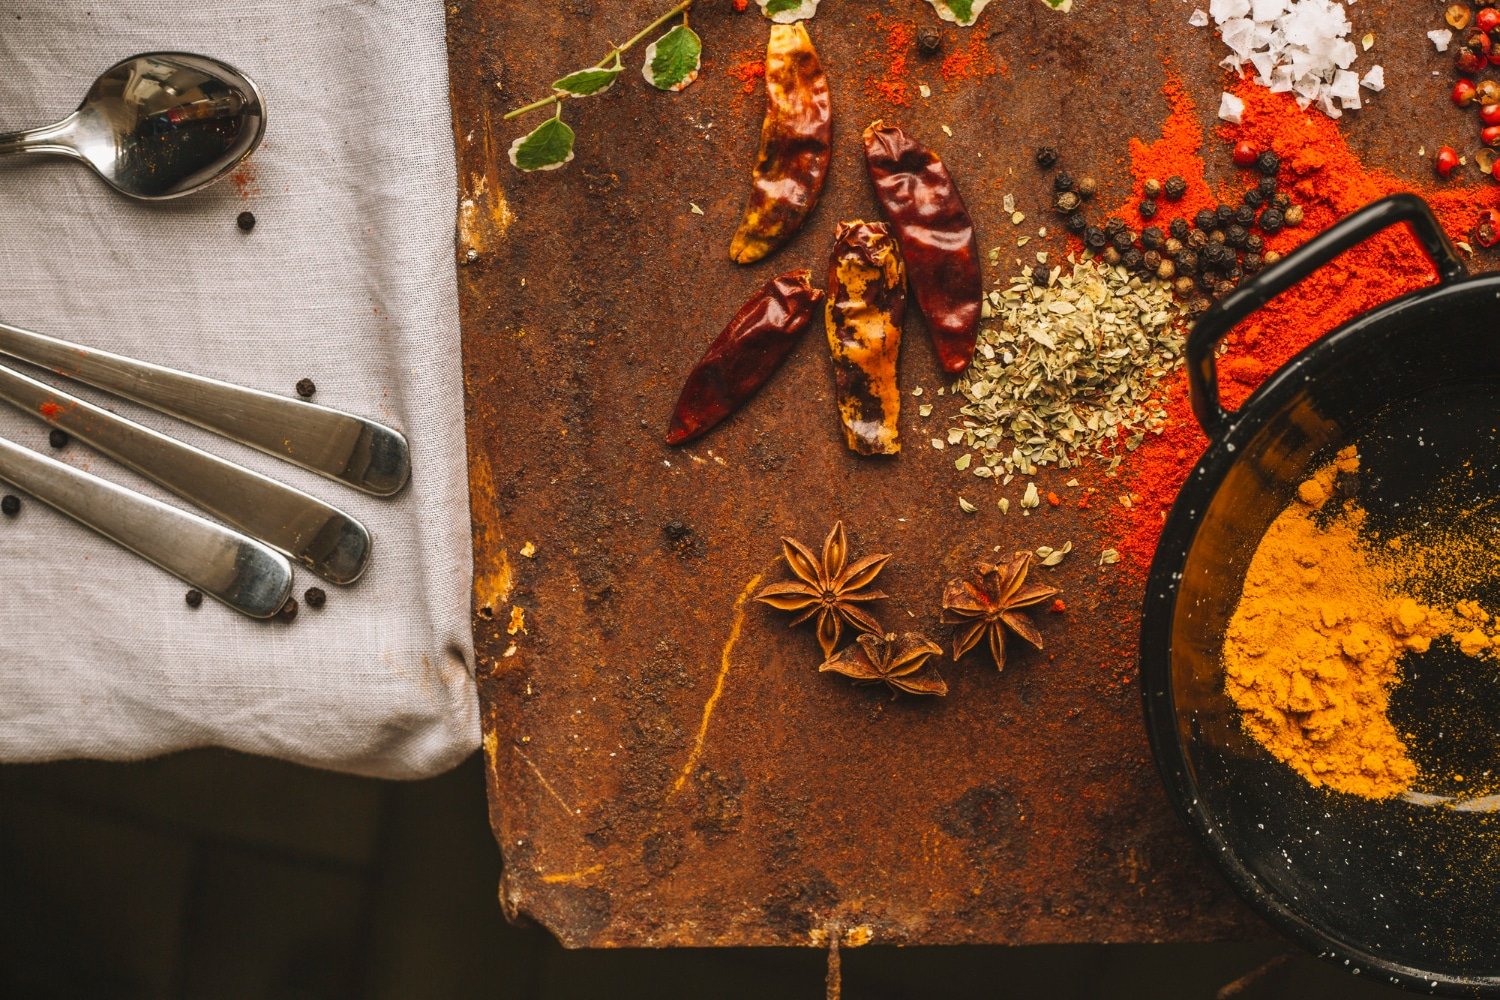 Read more about the article Cook Flavorful Meals With RawSpiceBar’s Freshly Ground Spice Blends